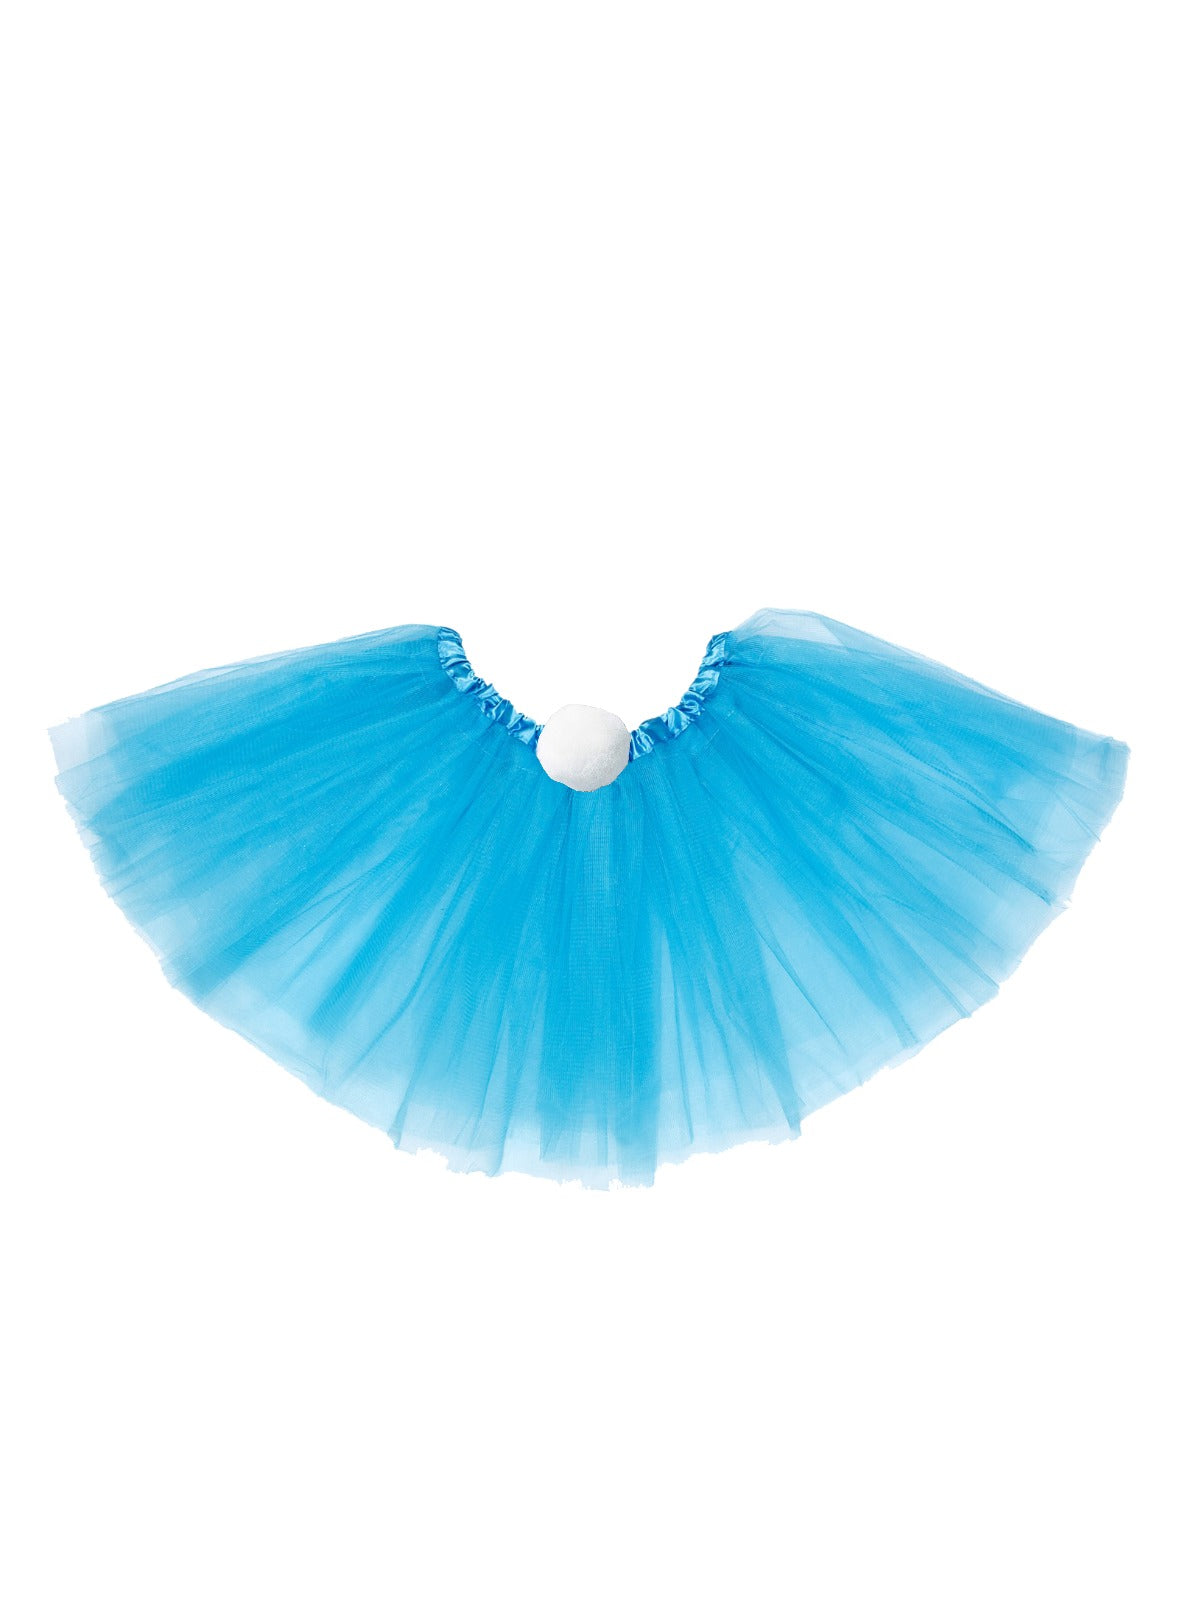 girls blue bunny tail tutu for Easter